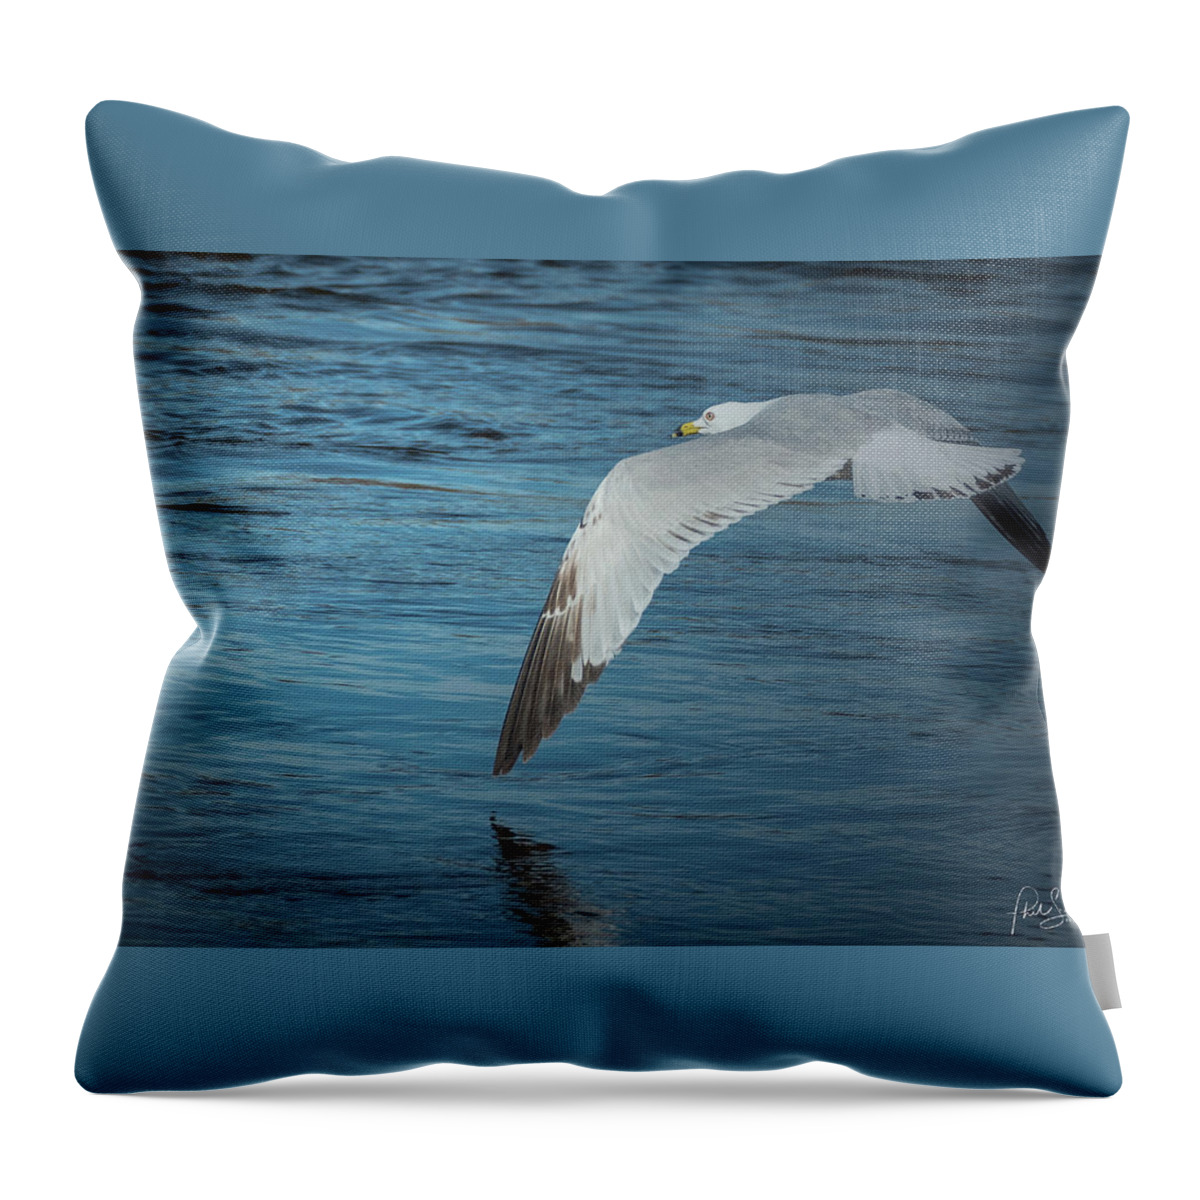 Wing Throw Pillow featuring the photograph Wingtip Over Water by Phil S Addis